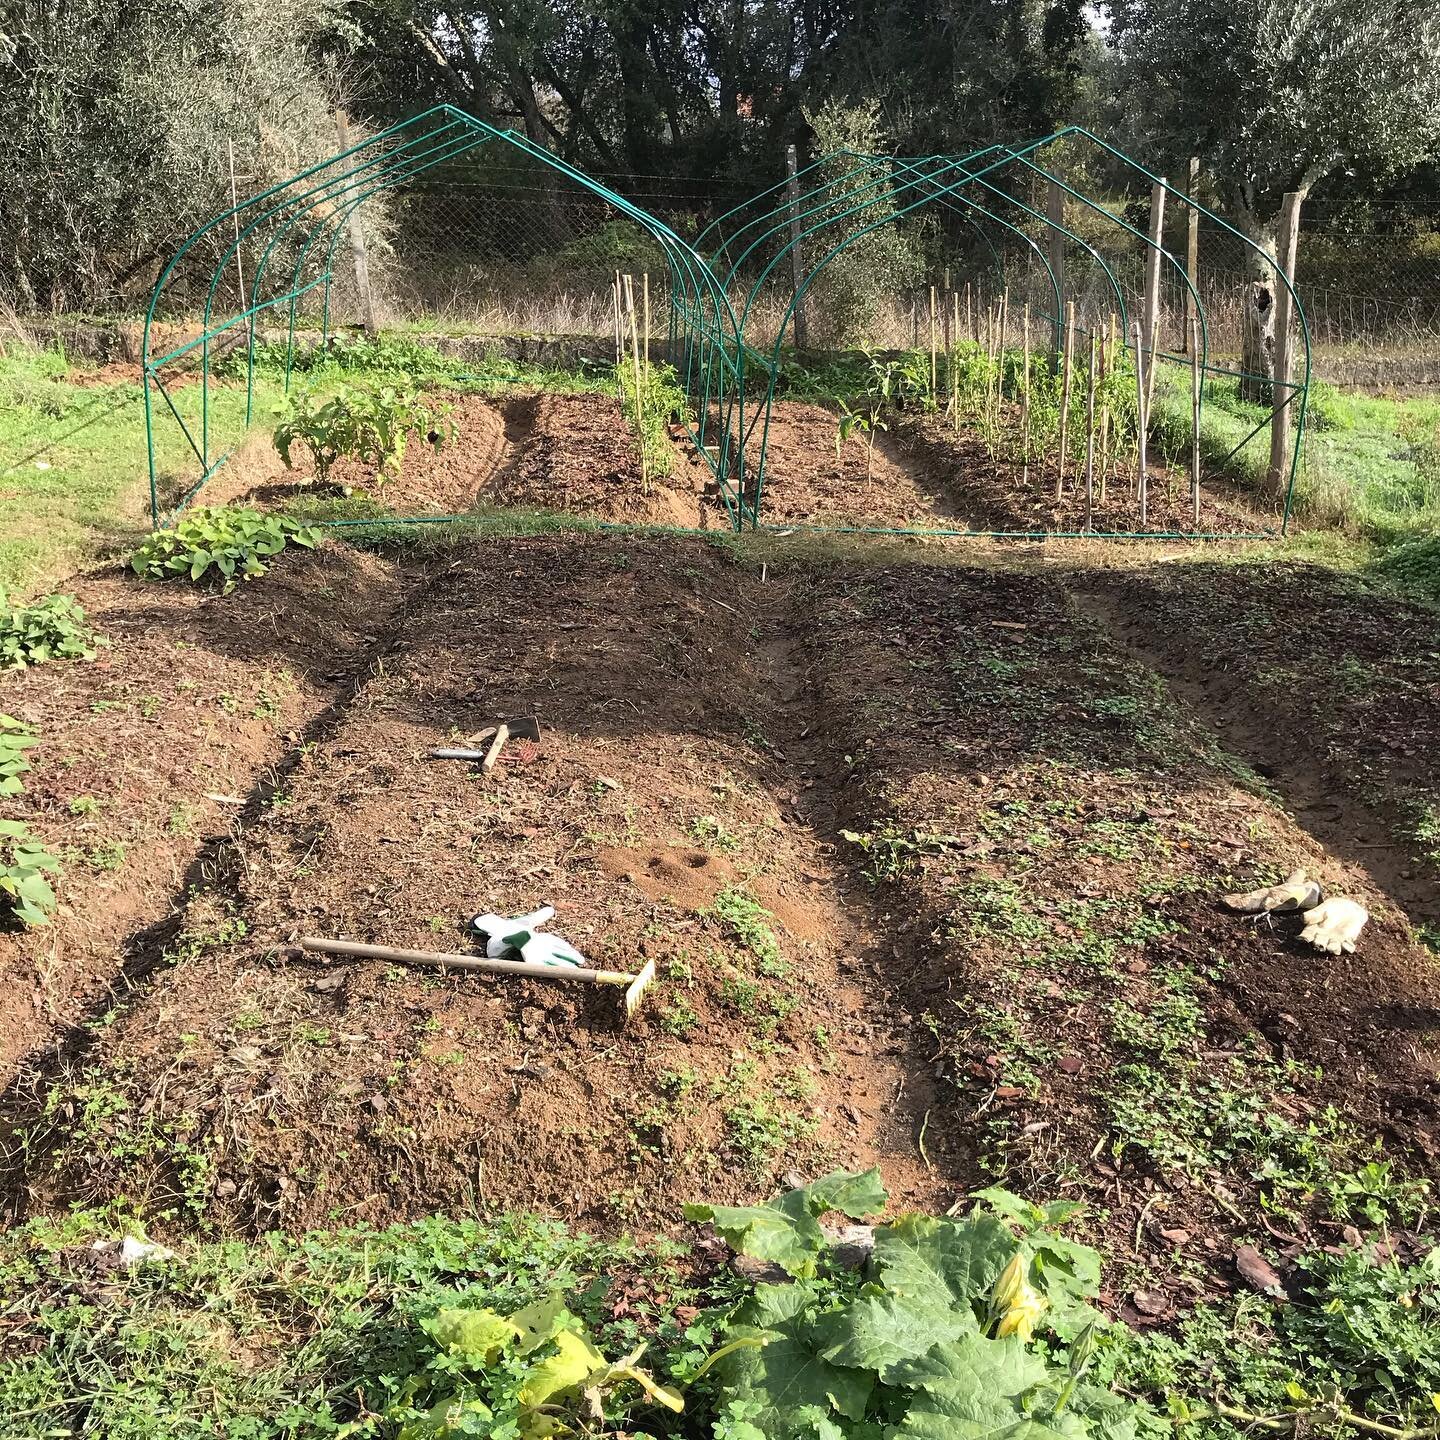 SCROLL FOR TODAYS PROCESS/PROGRESS***

I learn so much from cultivating land and these days this is what I crave the most. I know a lot about permaculture principles applied to organizational design, leadership and living. I&rsquo;ve studied permacul